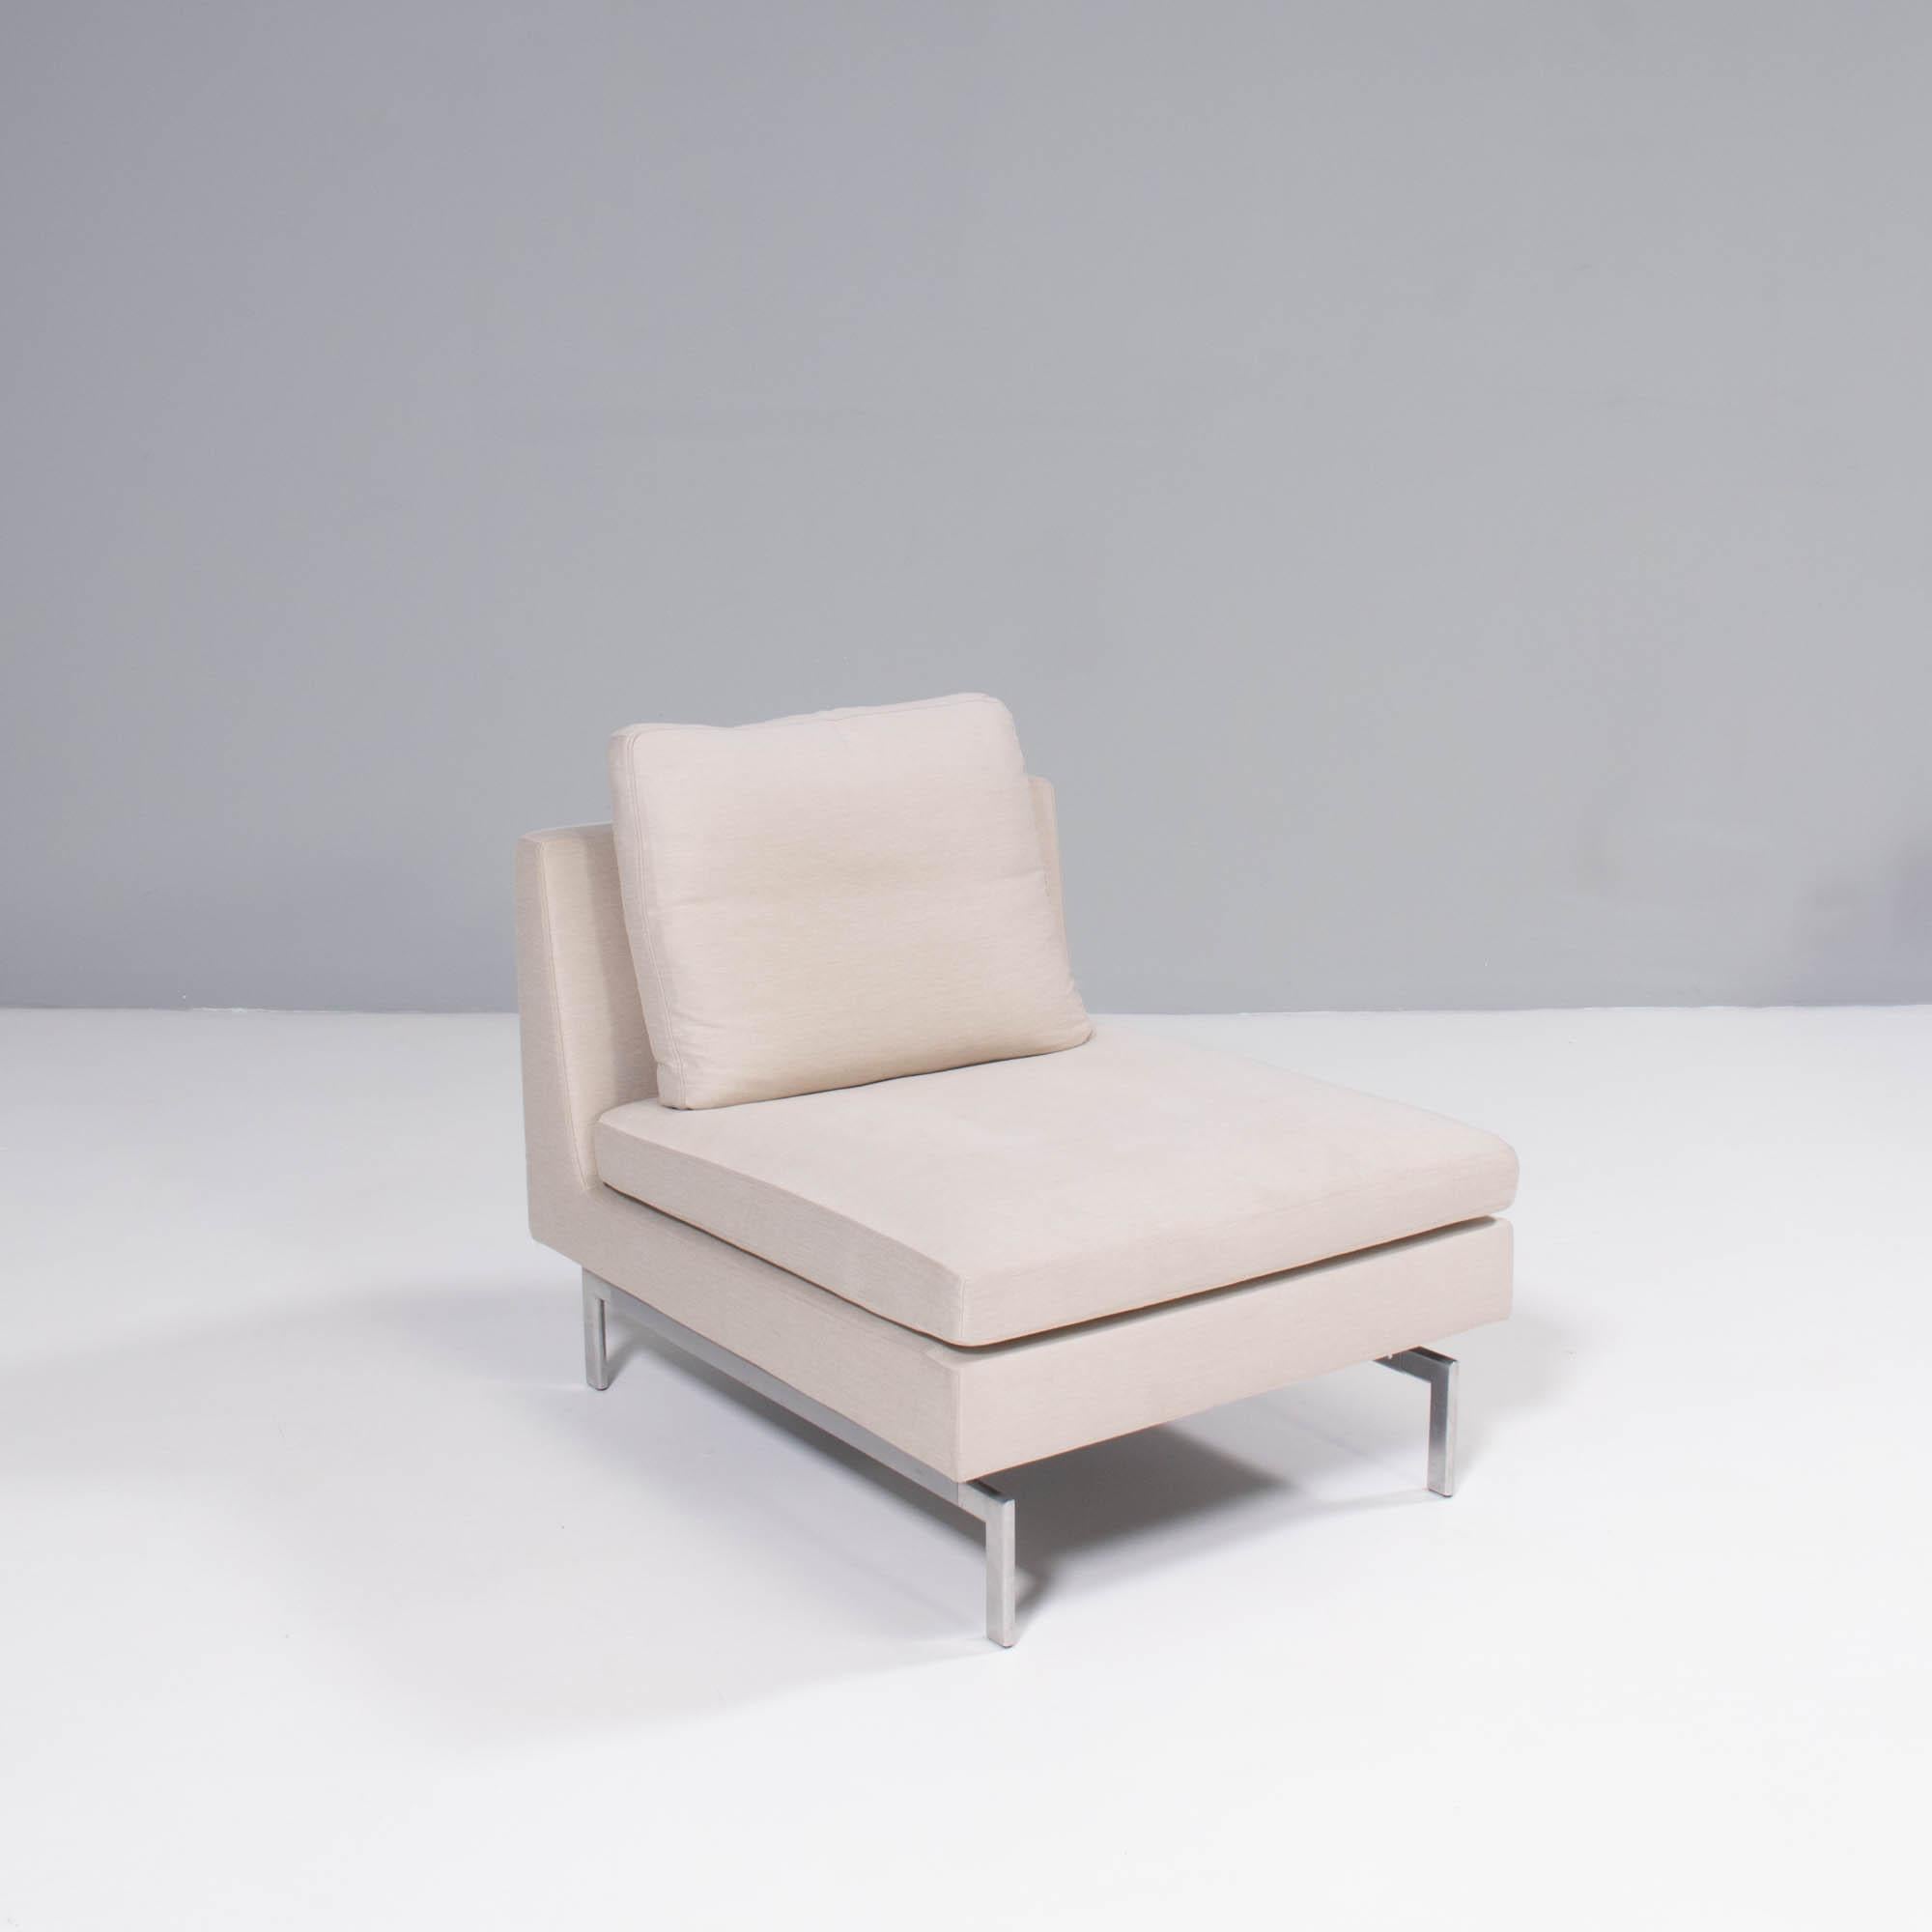 Originally designed by Didier Gomez for Ligne Roset in 2014, the Stricto Sensu fireside chair offers the maximum comfort within a streamline design.

The fireside chairs, fully upholstered in cream fabric, feature a separate seat and back cushions